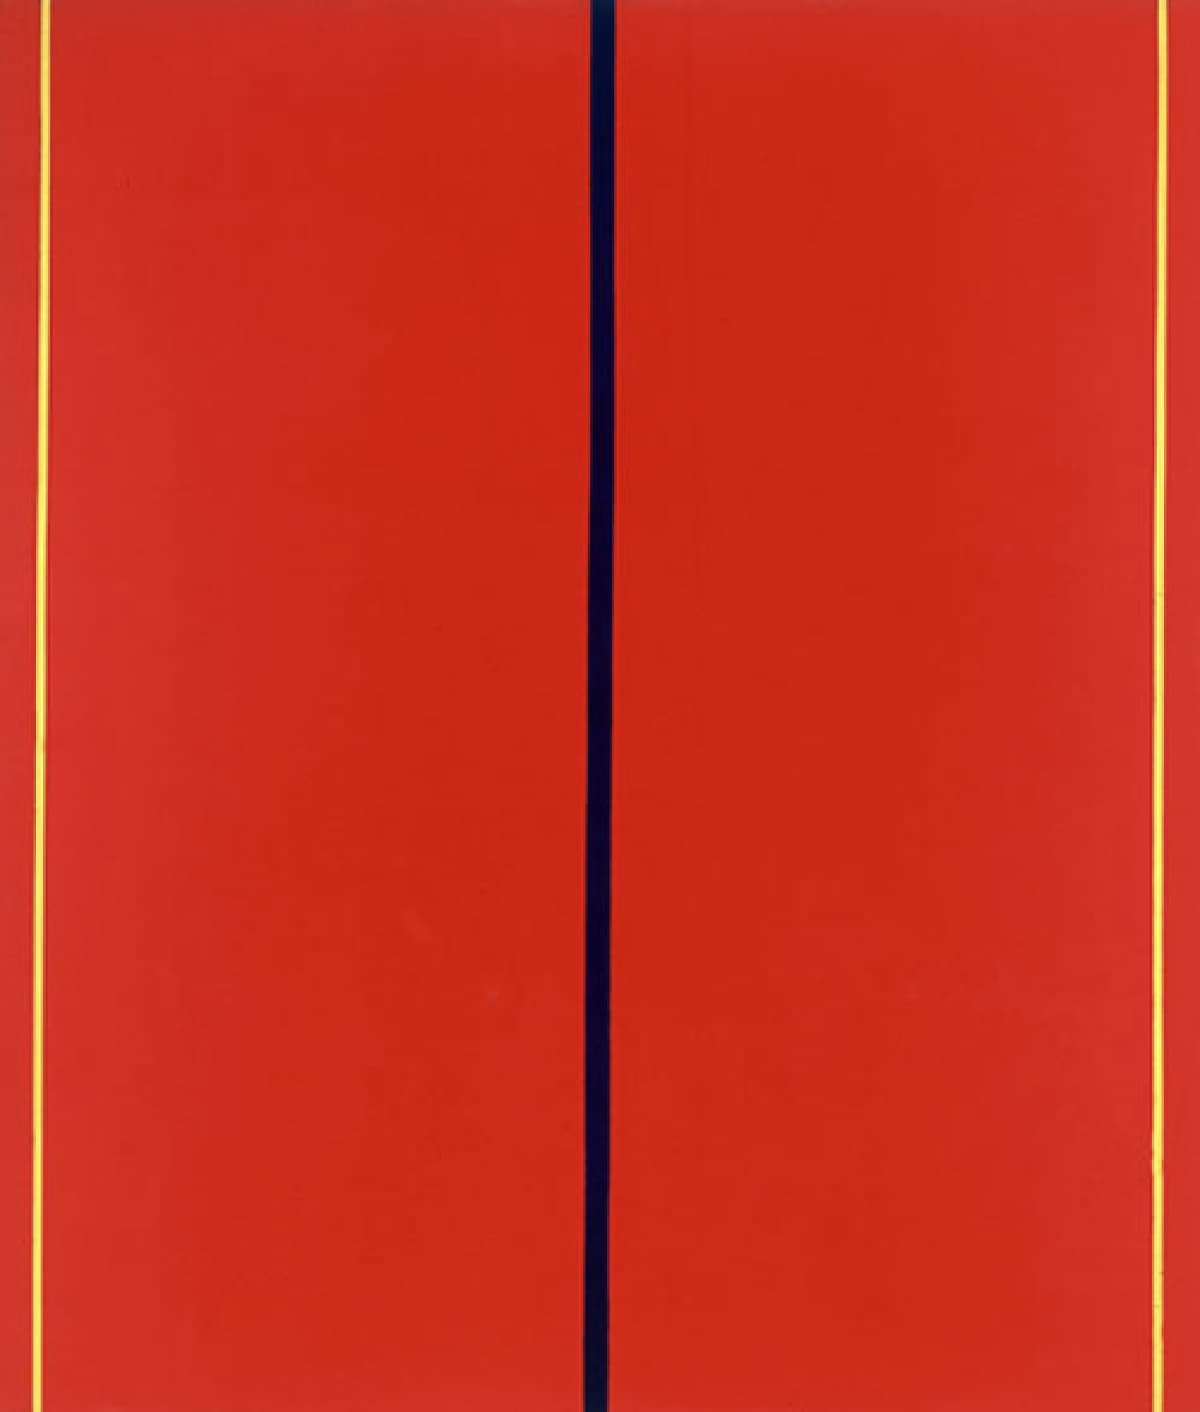 Barnett Newman Who’s Afraid of Red, Yellow and Blue II